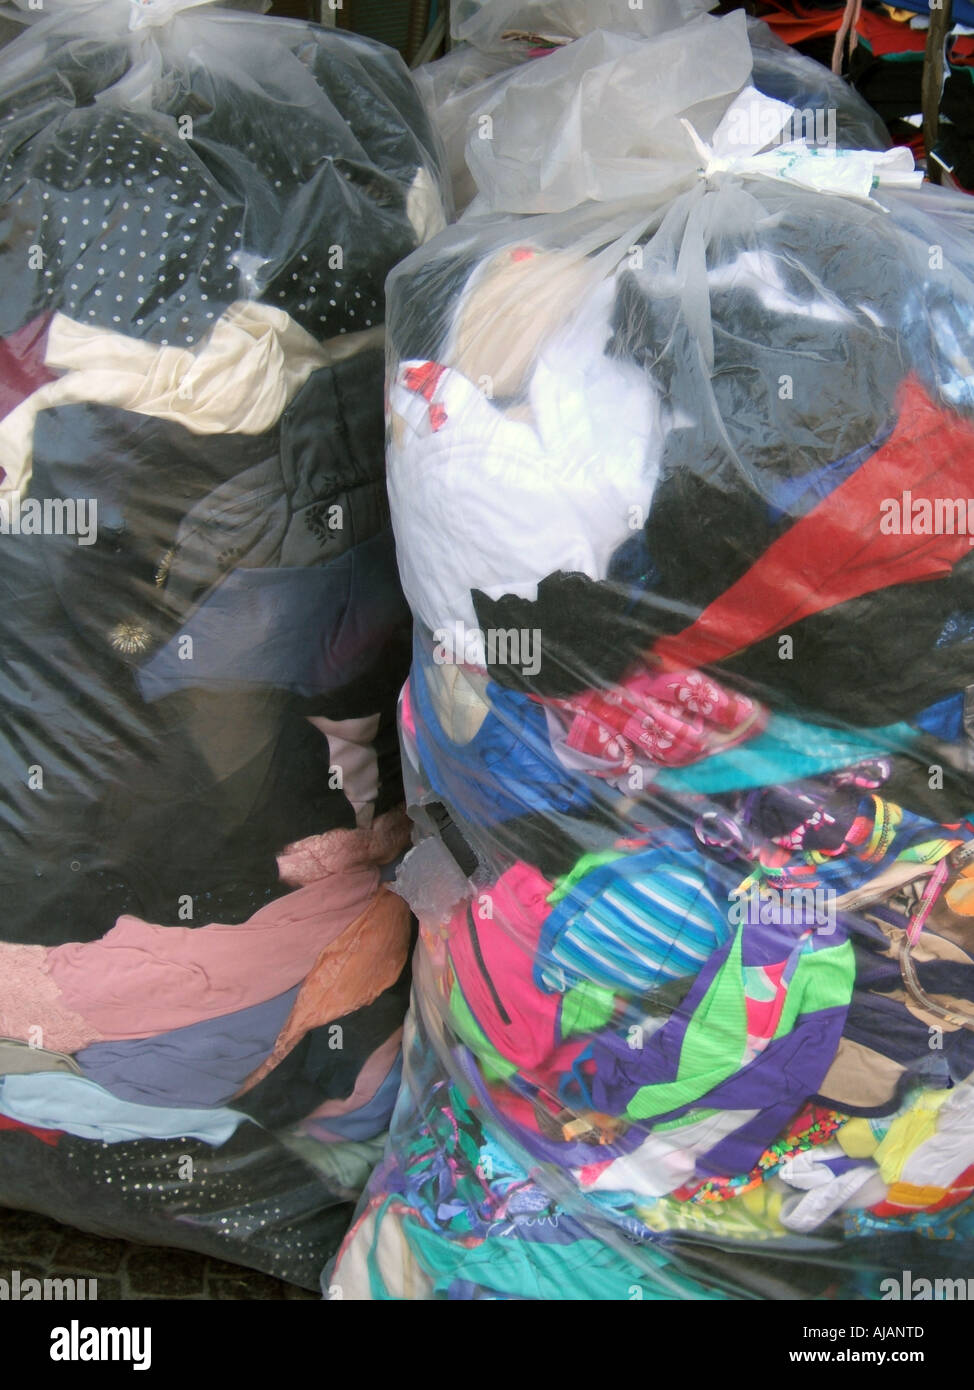 pile of clothes in plastic bags Stock Photo - Alamy